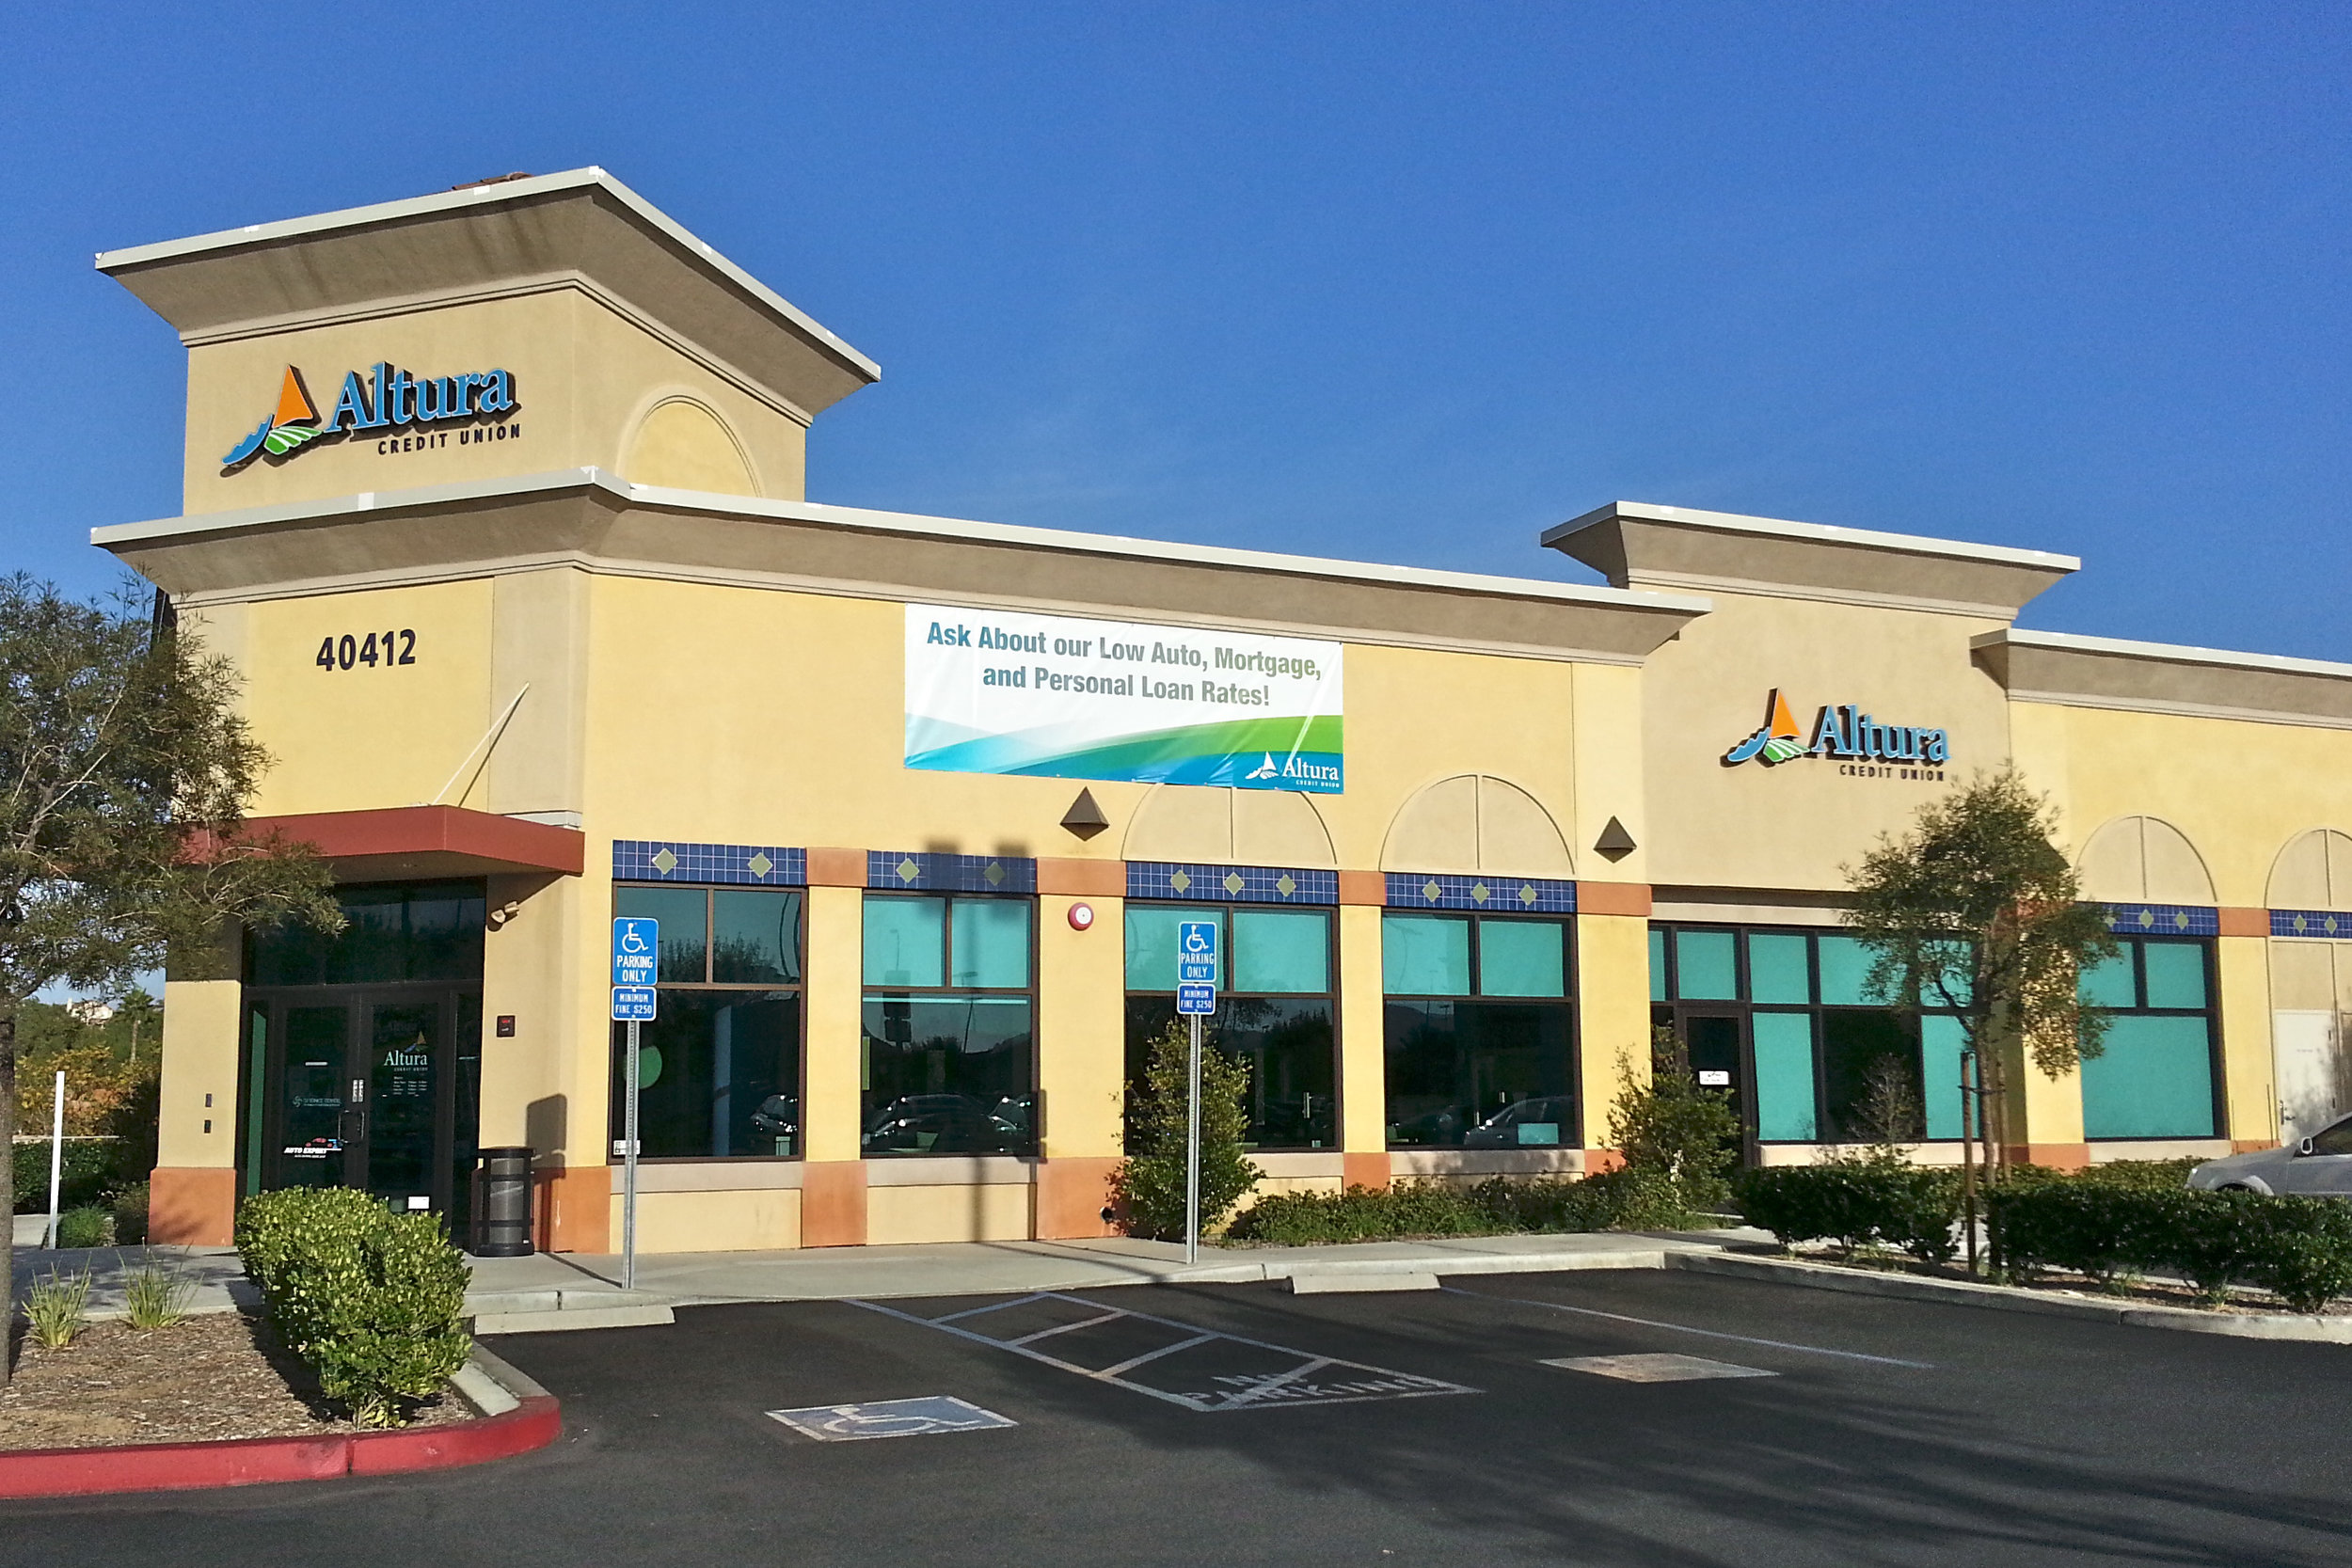 Altura Credit Union promotional wall banner